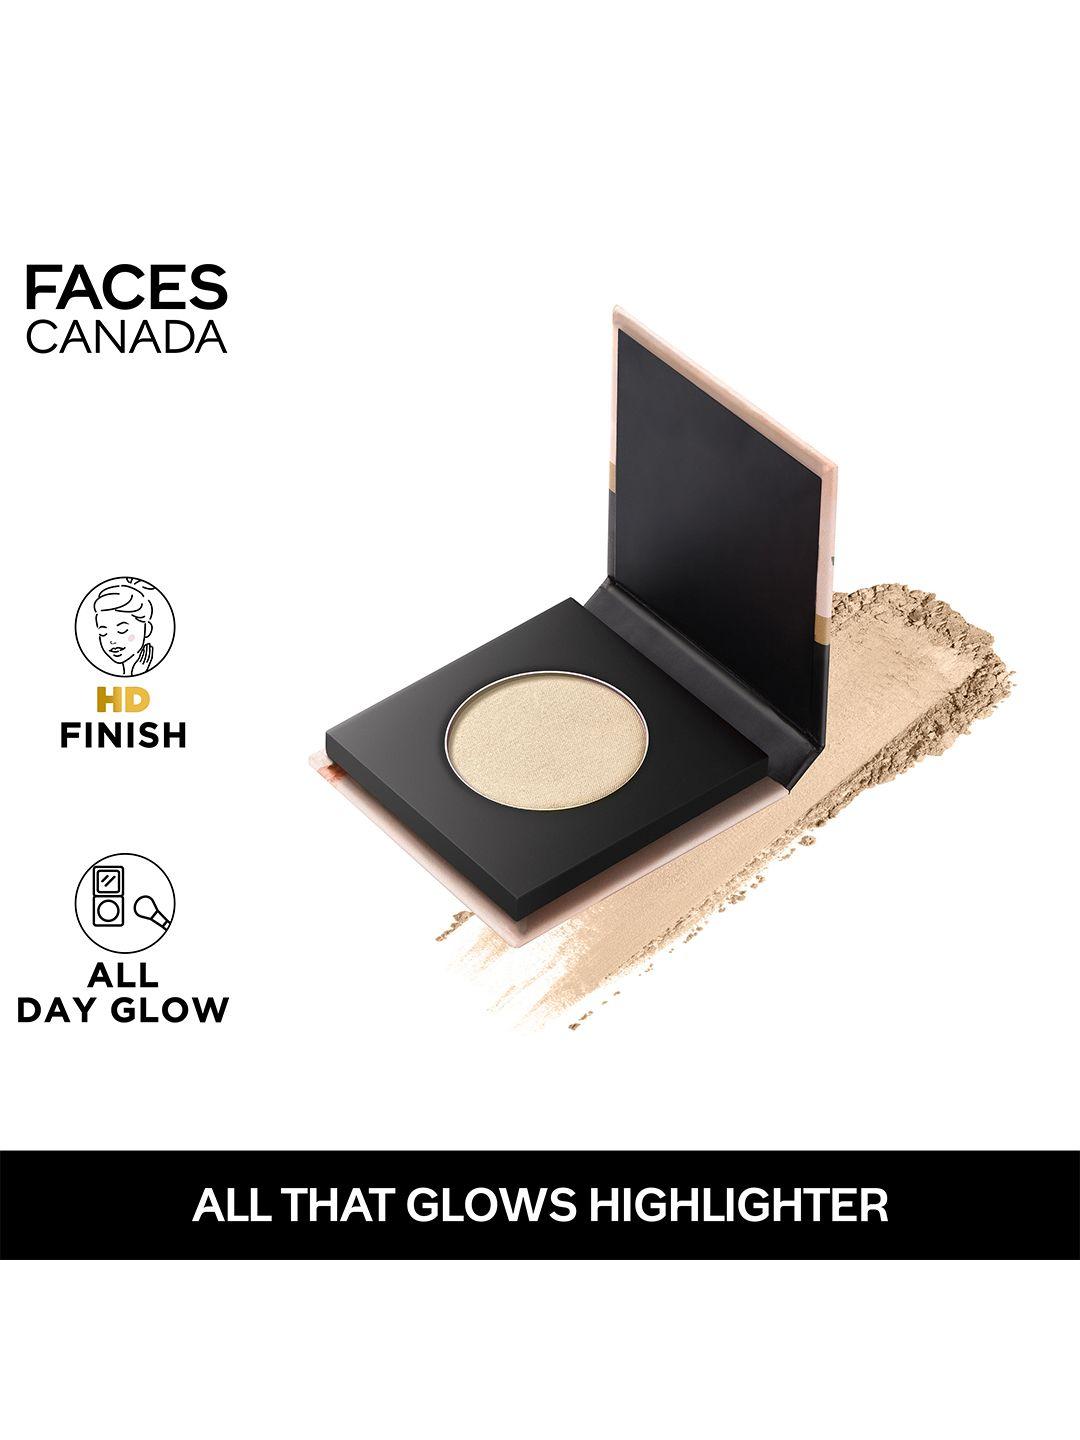 faces canada all that glows highlighter - long lasting - lightweight - hello sunshine